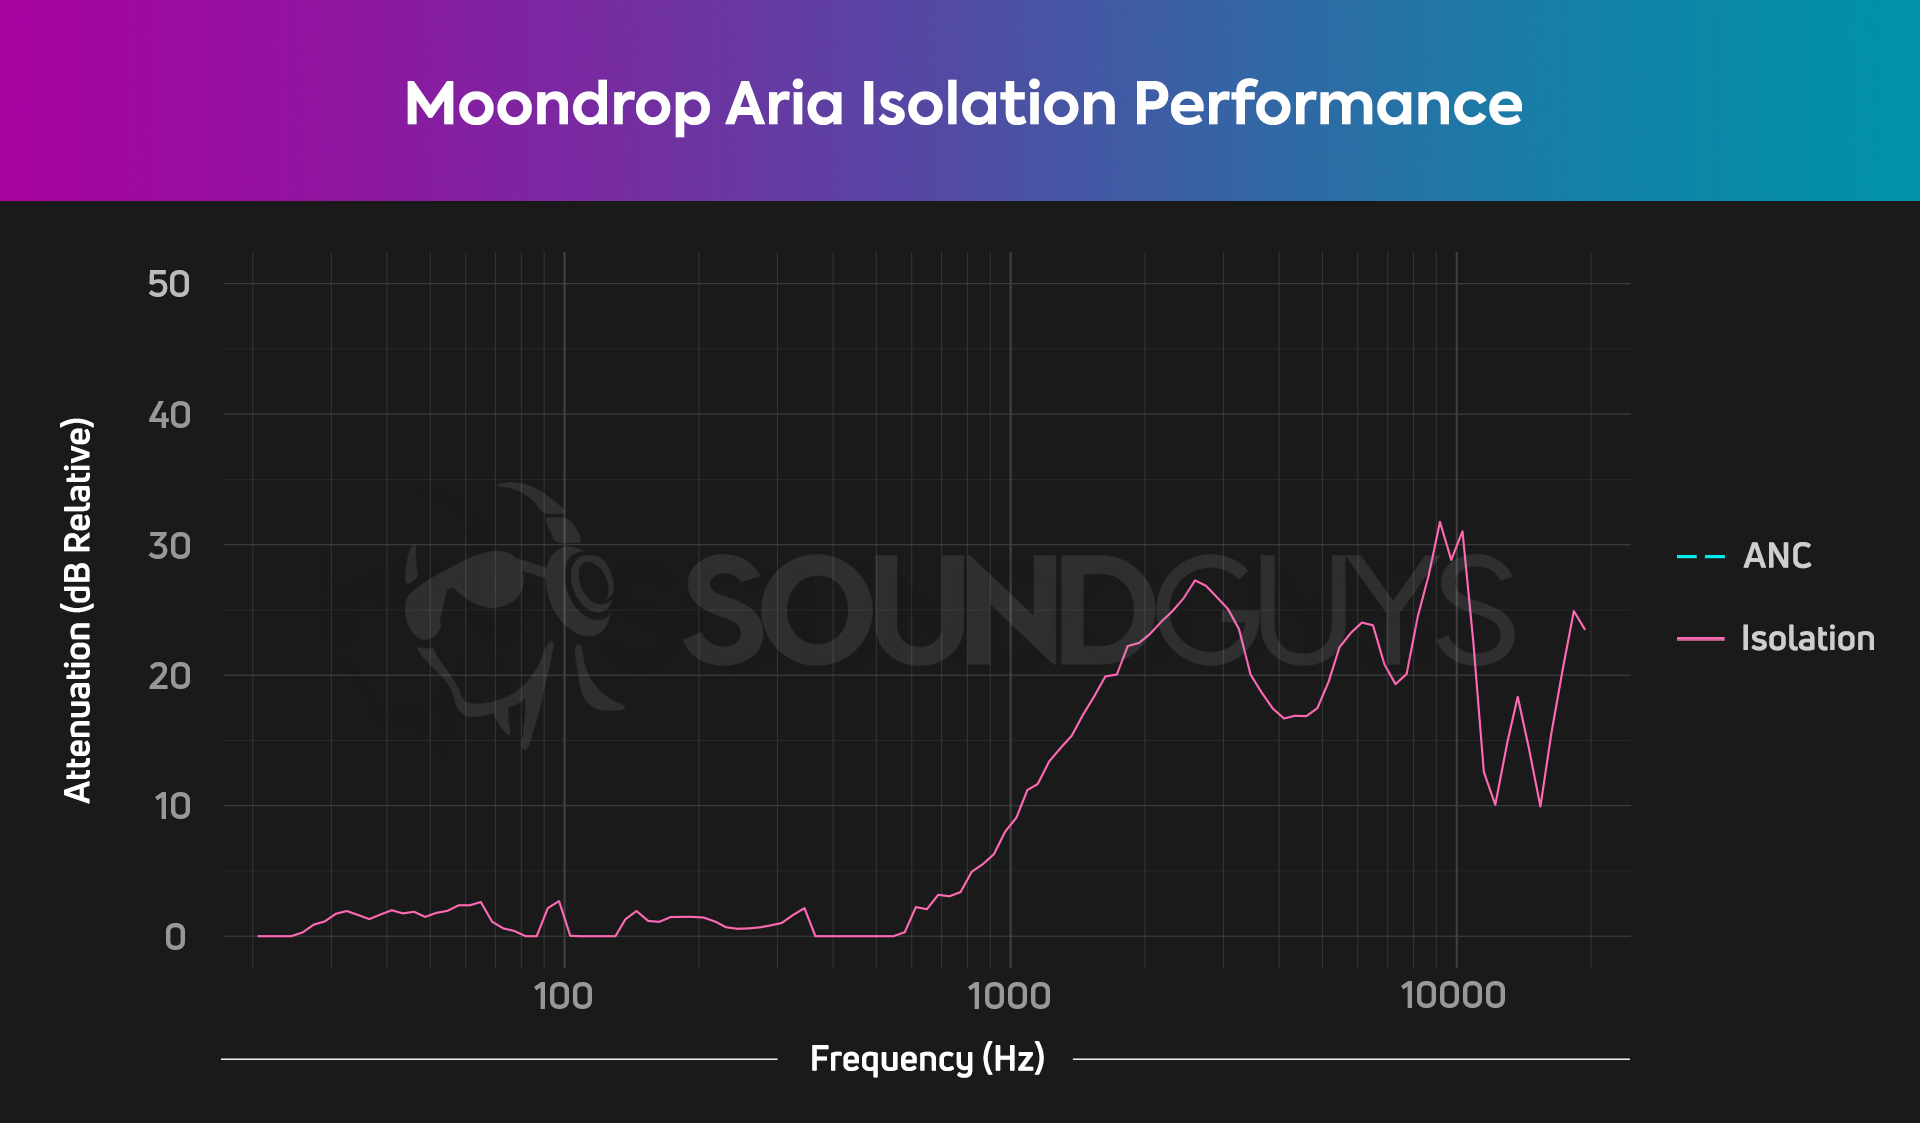 The isolation chart for the Moondrop Aria and its isolation performance.